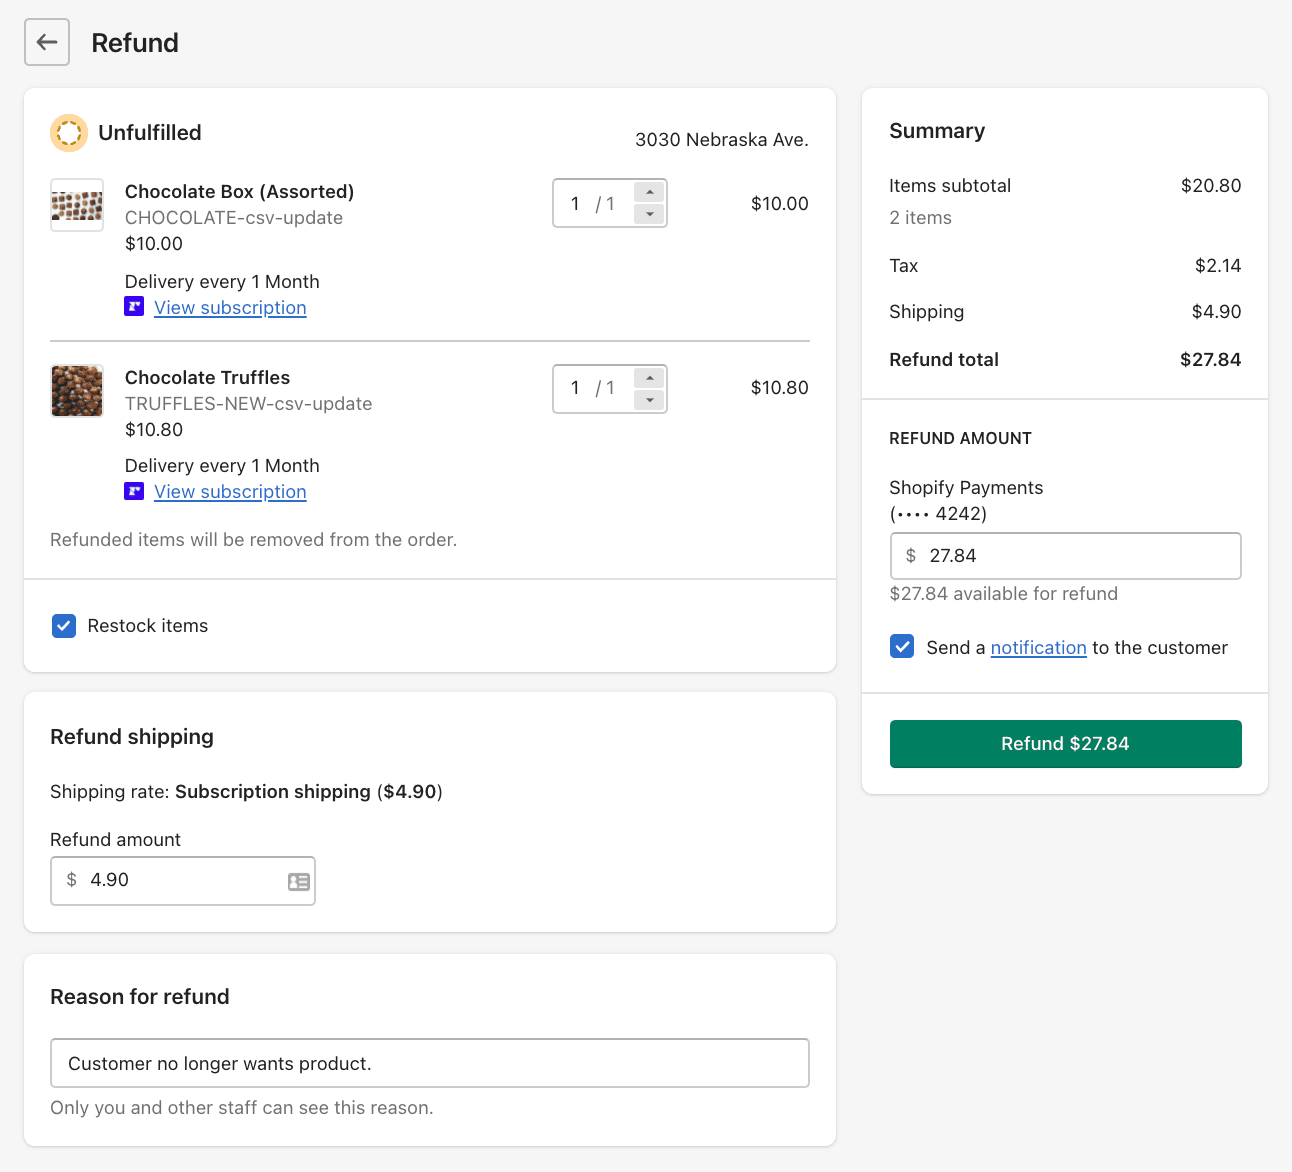 Shopify_user-interface_showing_the_page_to_refund_a_recurring_subscription_order_from_Recharge.png